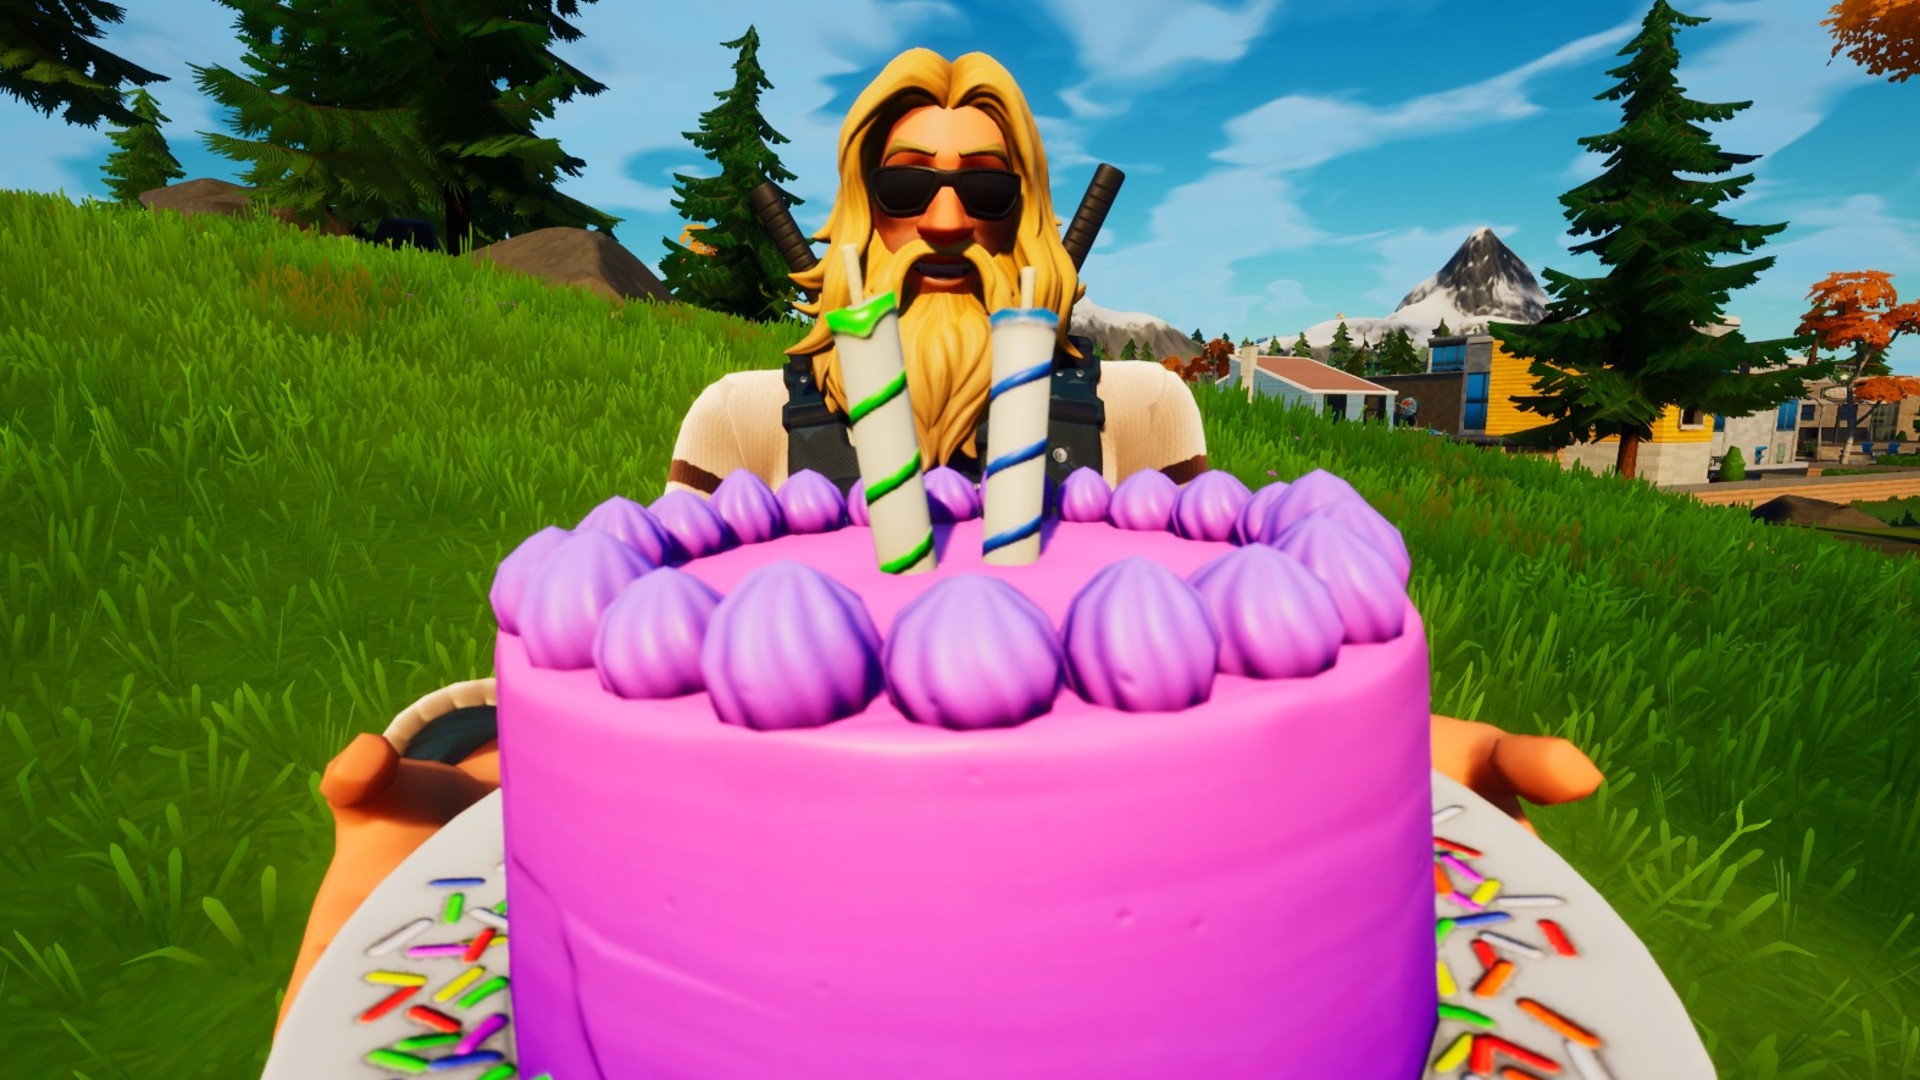 Fortnite Cake In Chattanooga Tn Where To Find Cakes In Fortnite For Birthday Challenges Pc Gamer